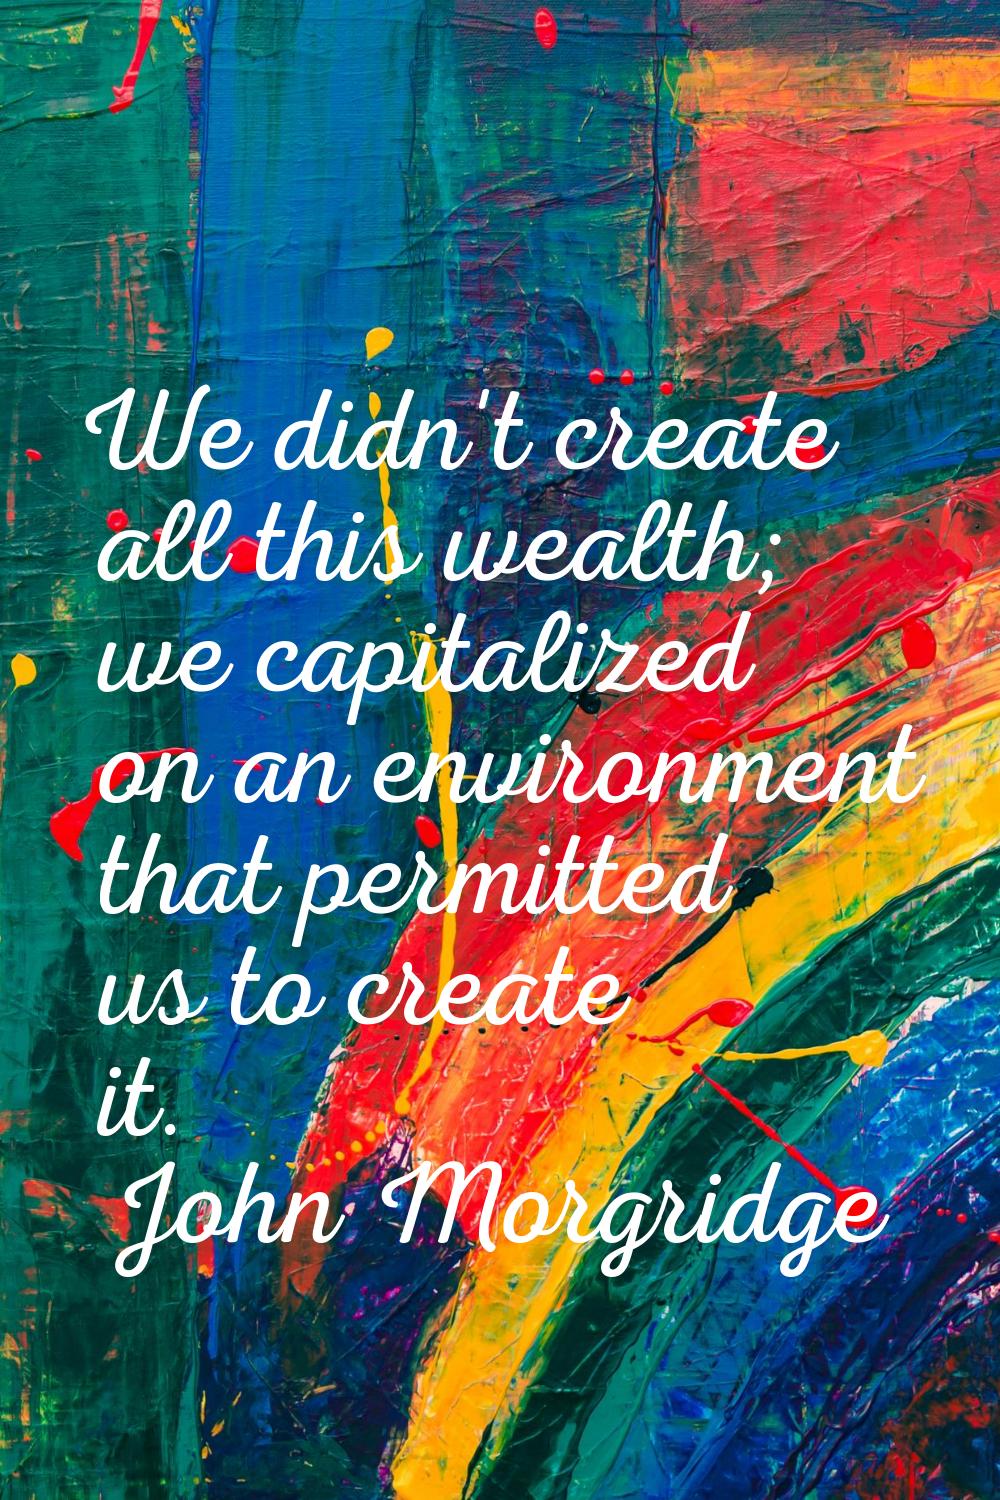 We didn't create all this wealth; we capitalized on an environment that permitted us to create it.